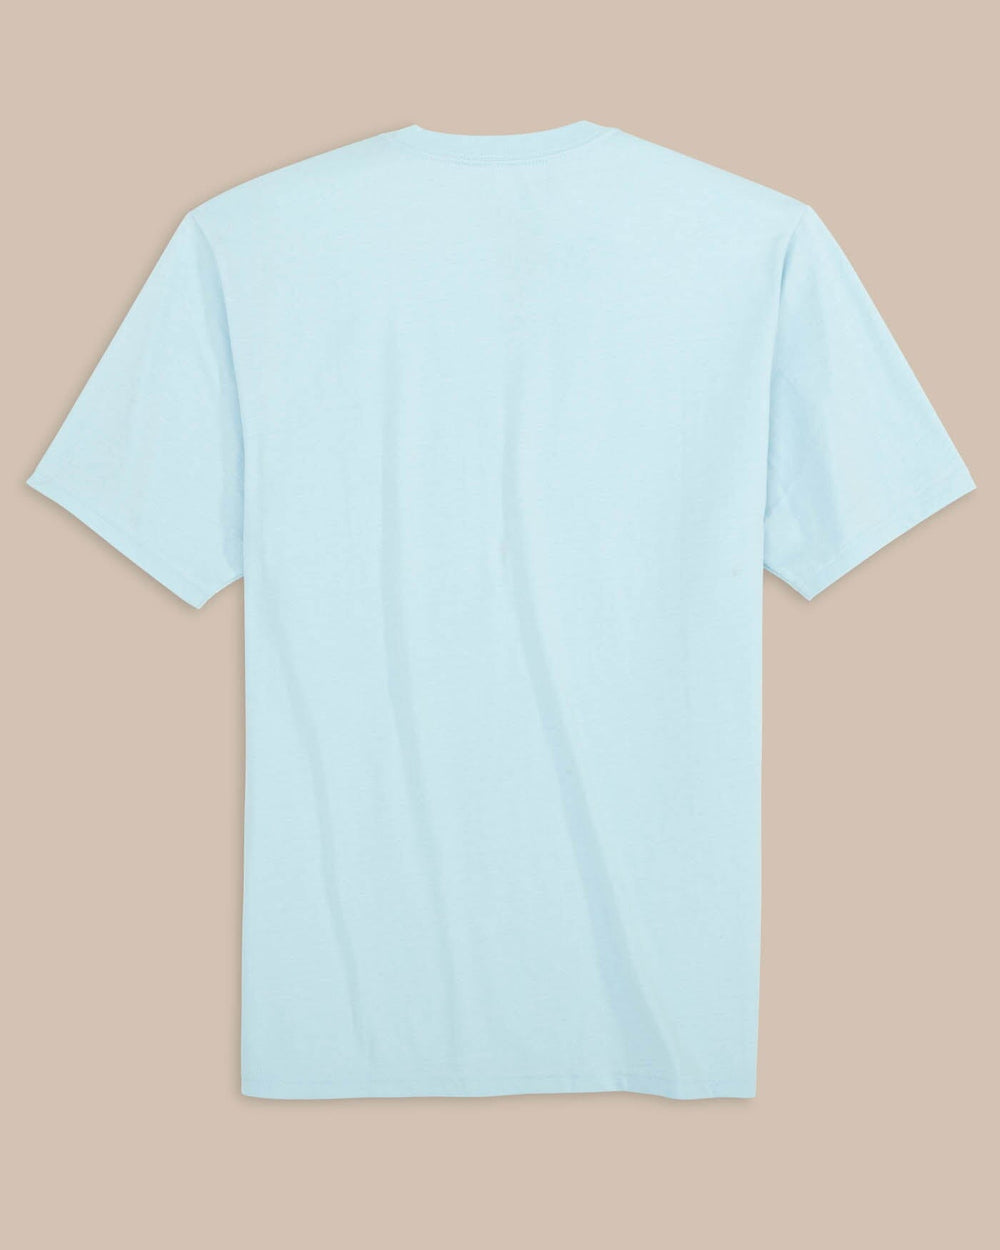 The back view of the Southern Tide ST Flag Left Chest Short Sleeve T-Shirt by Southern Tide - Chilled Blue